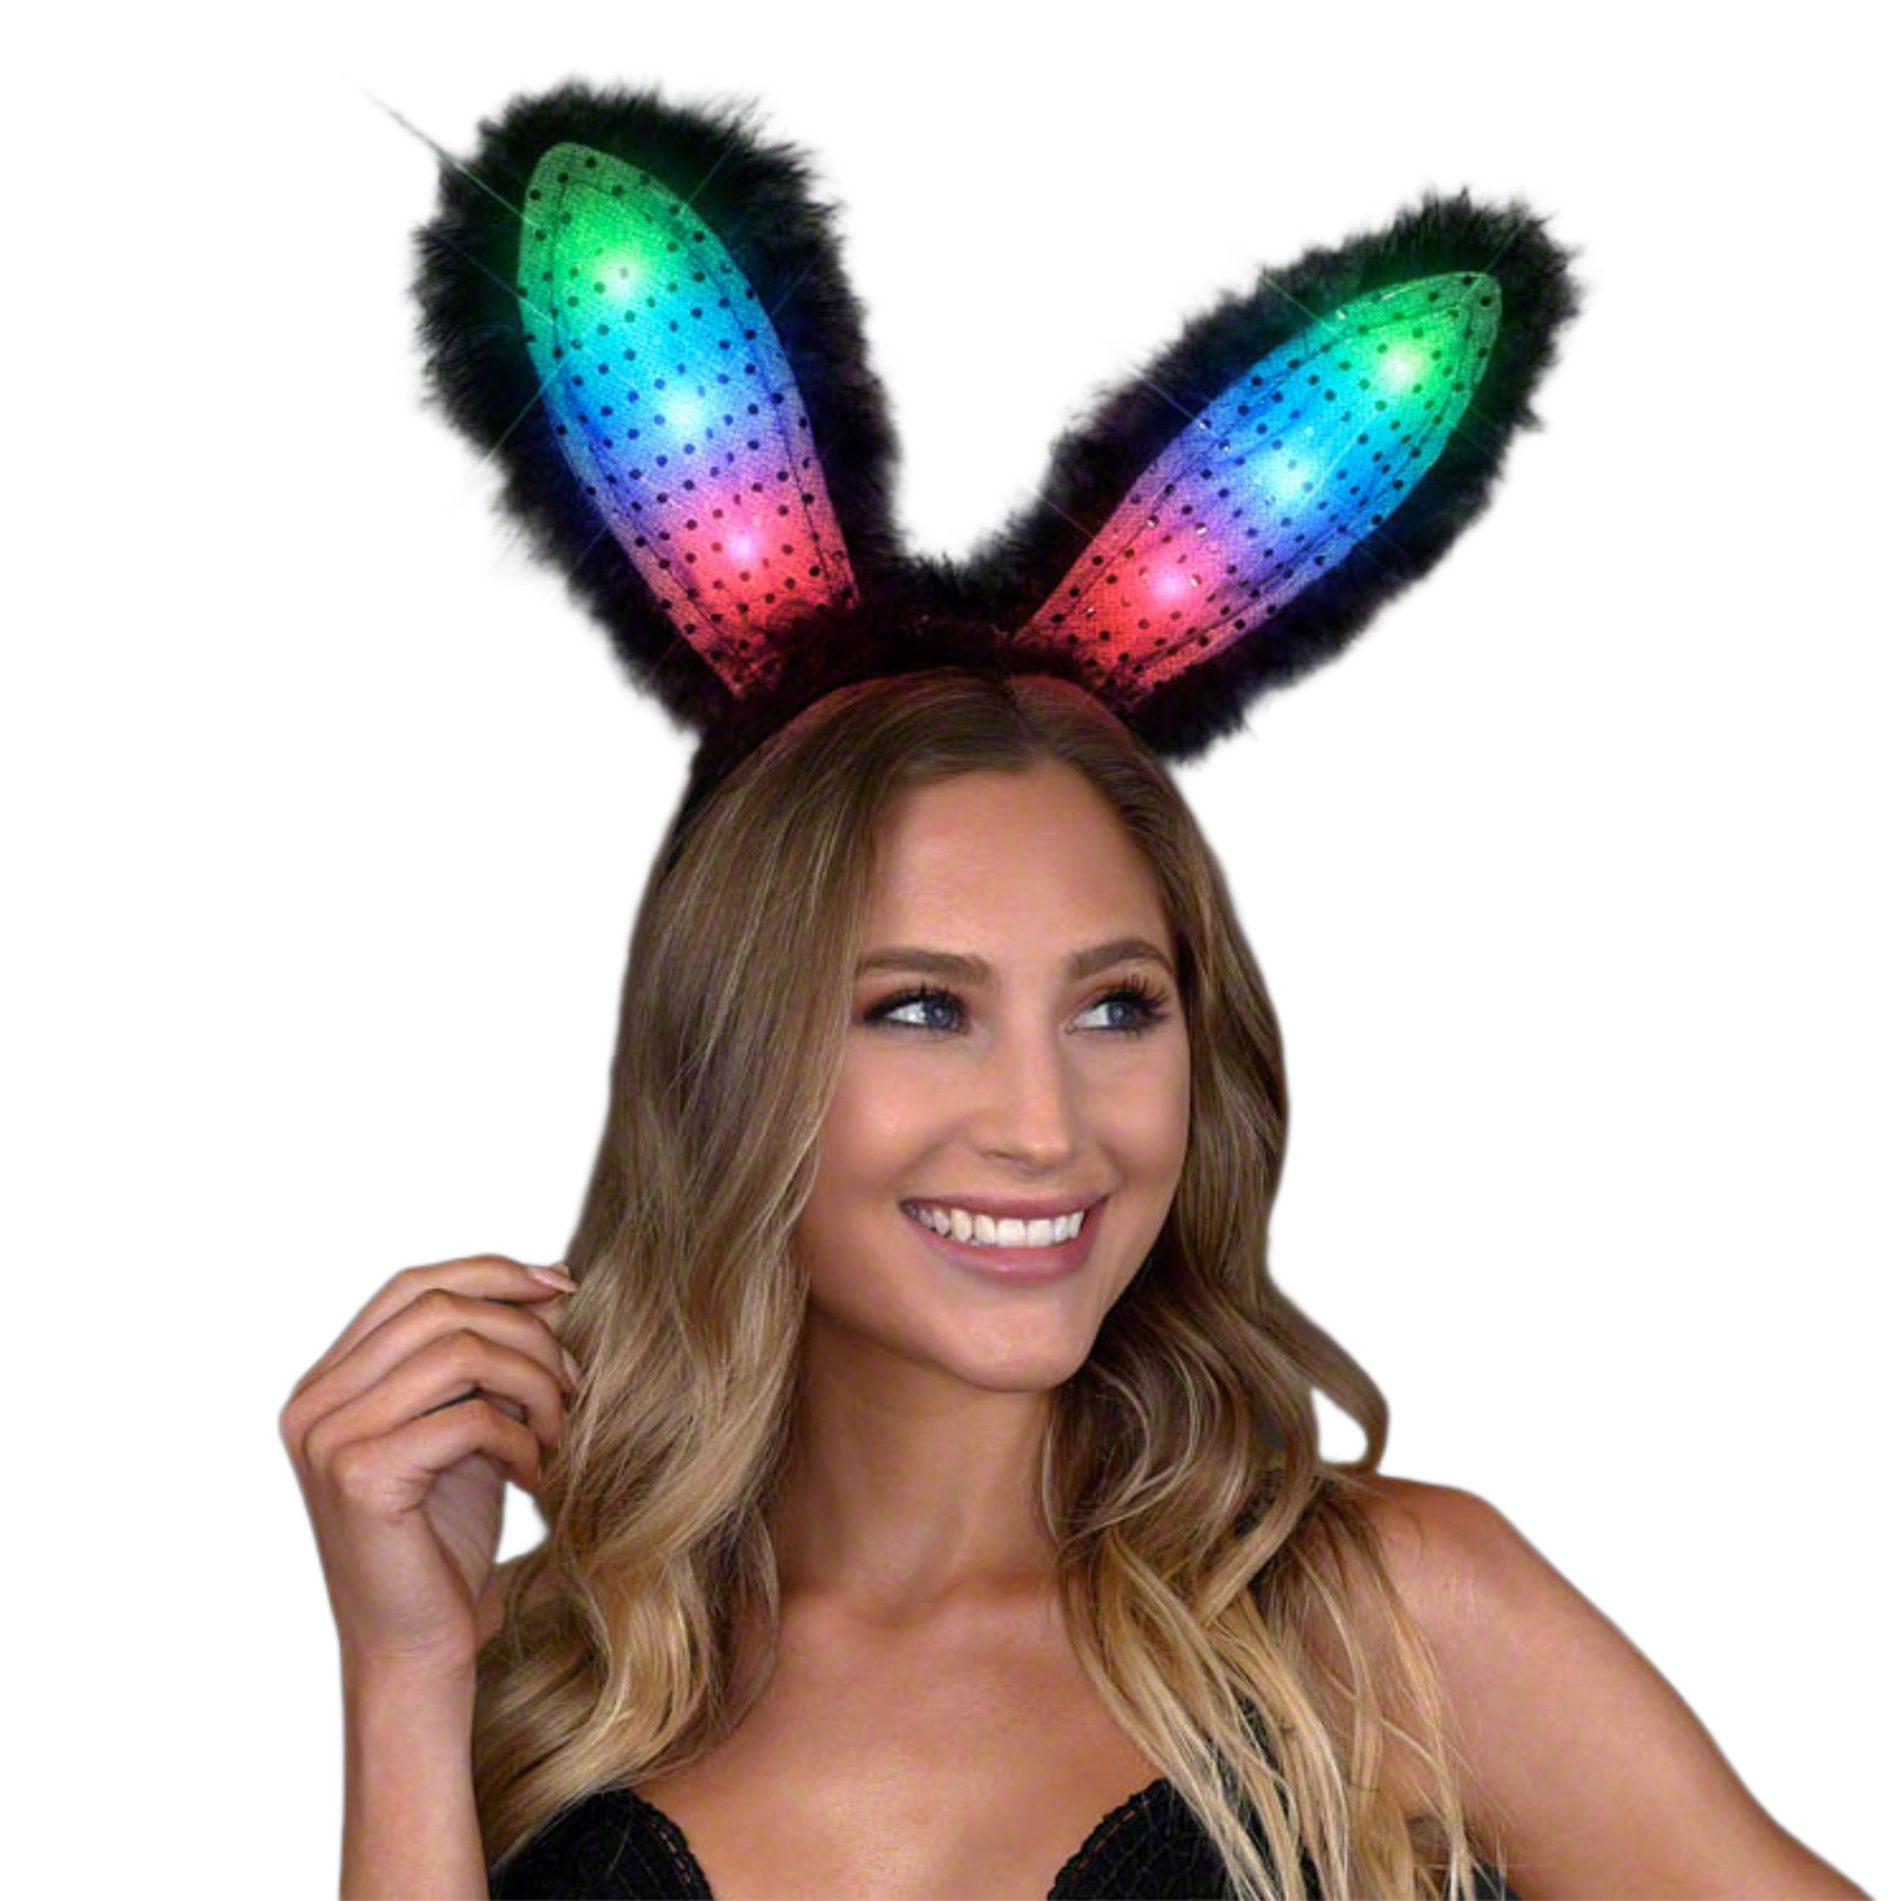 Black on Black Bunny Ears All Products 4